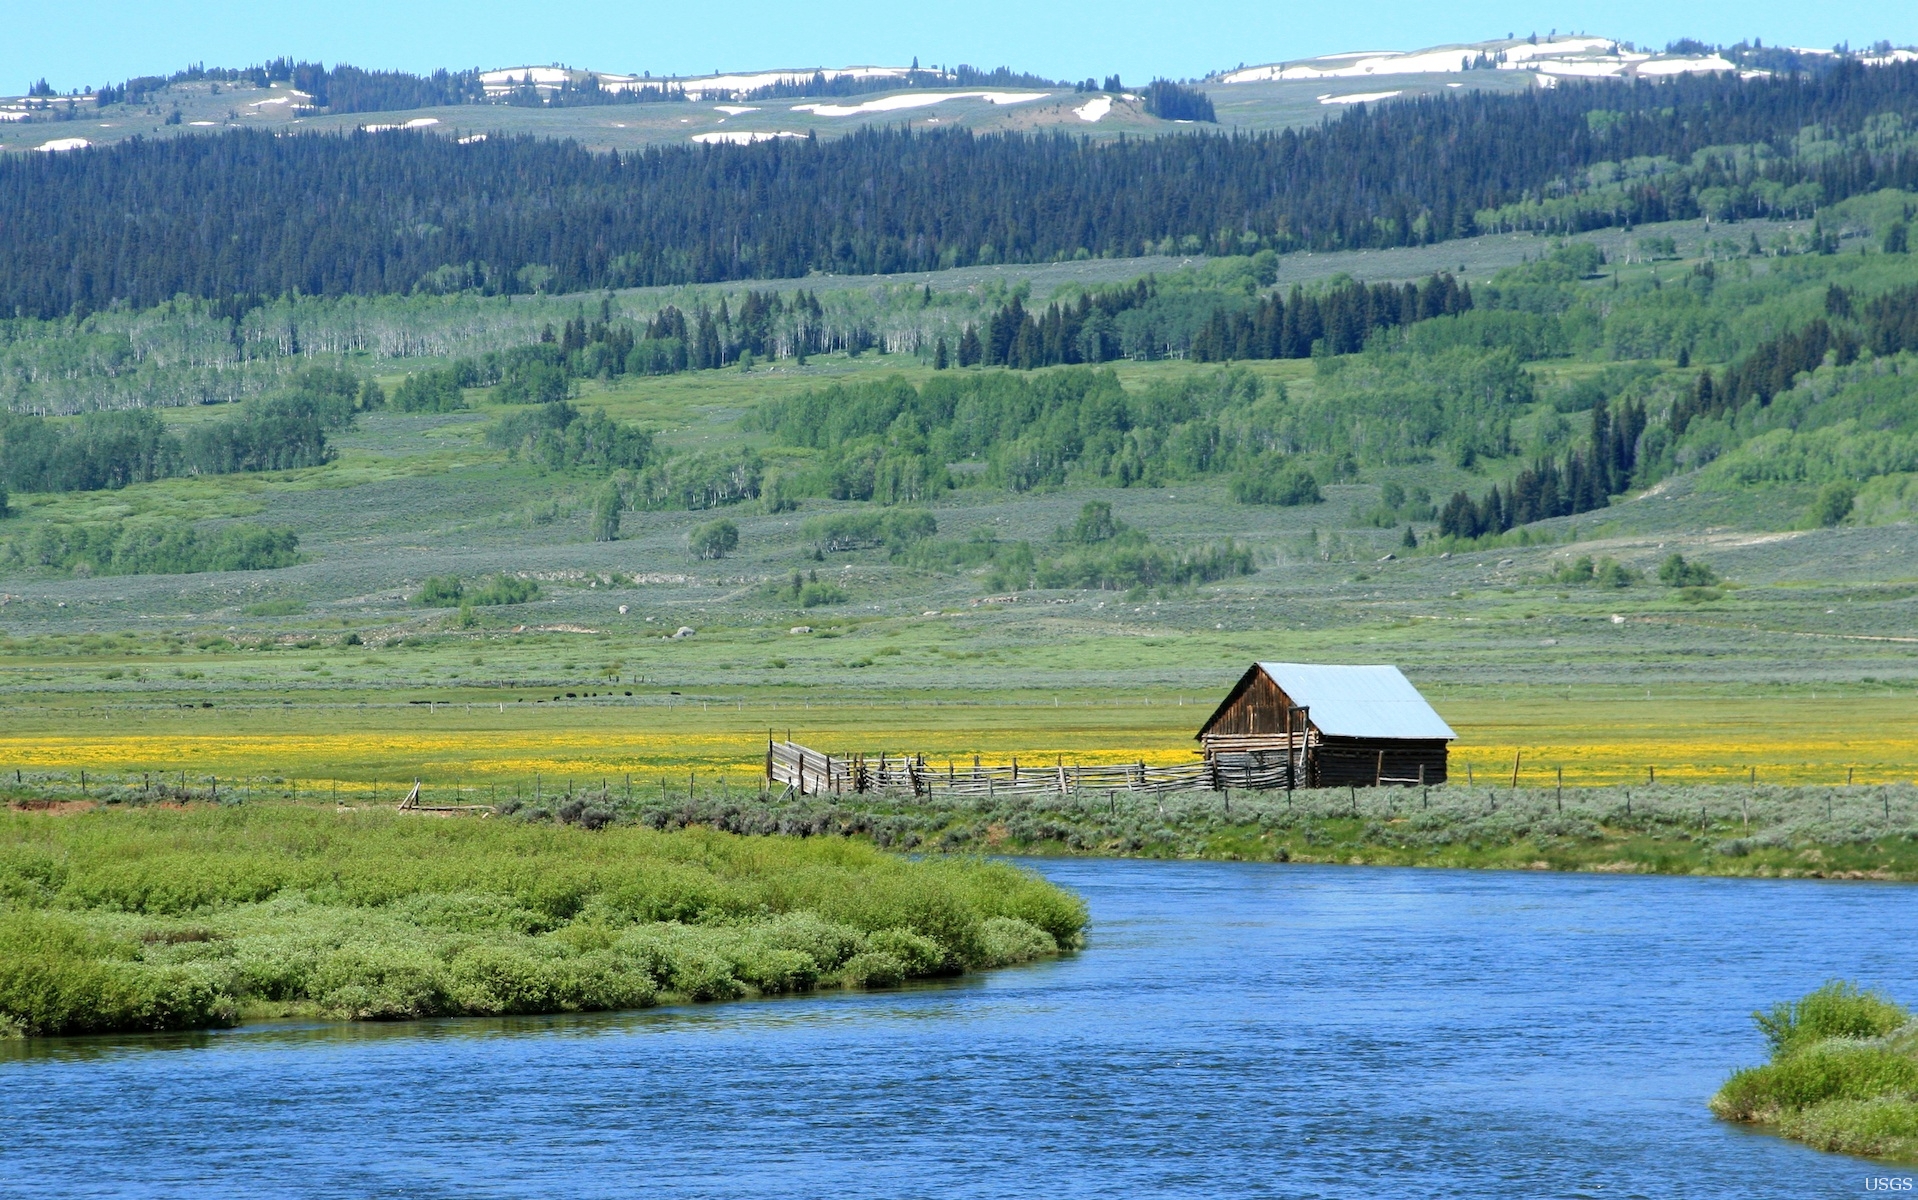 Picture of a cabin along a blue river with snowy foothills in the background